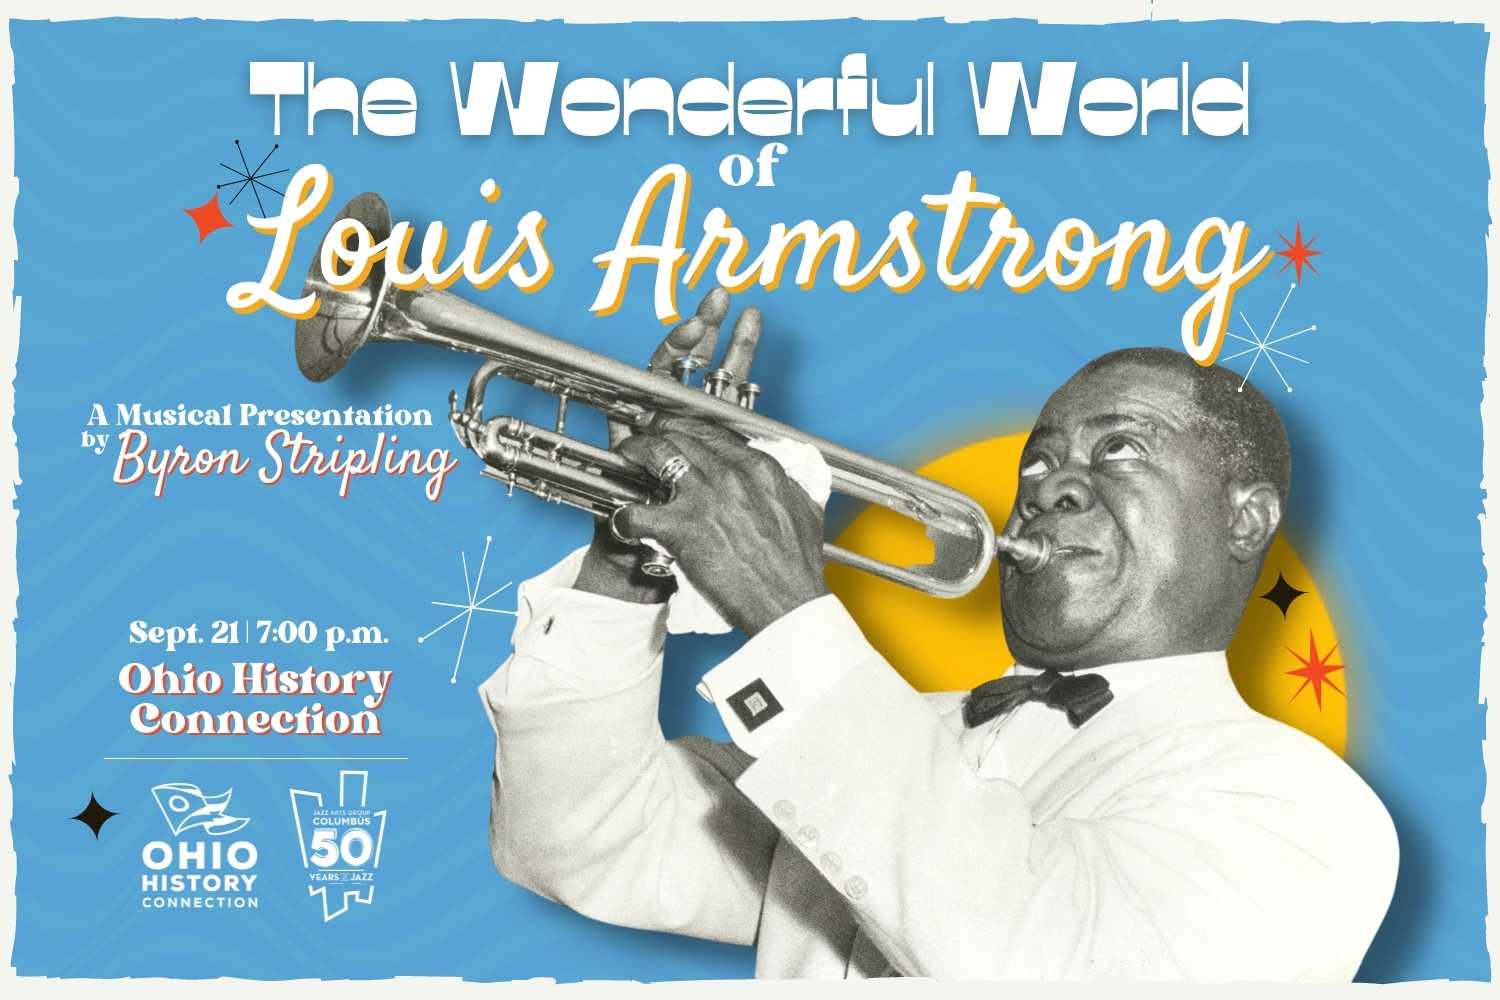 Louis Armstrong: An Extravagant Life  City Lights Booksellers & Publishers